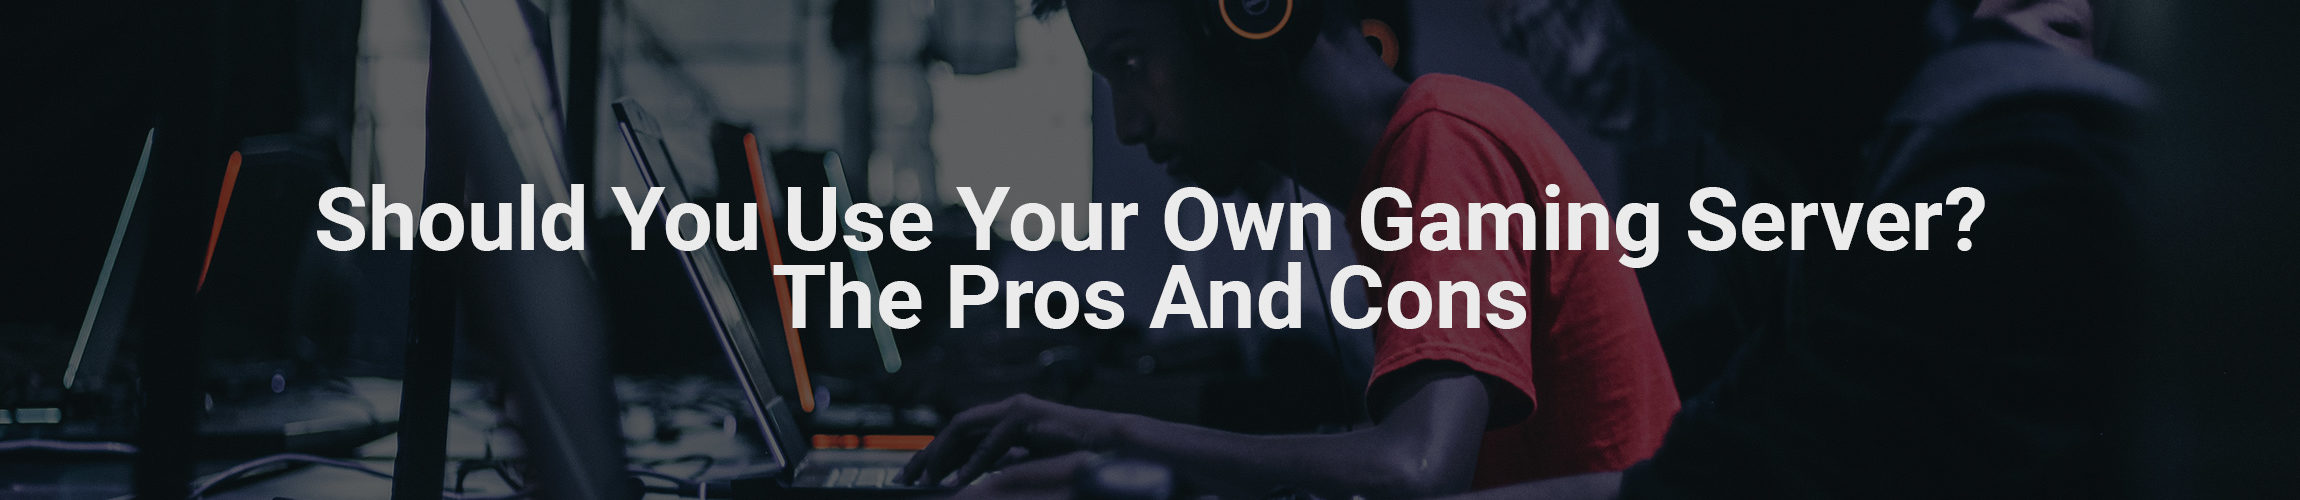 Should you use your own gaming server? pros and cons